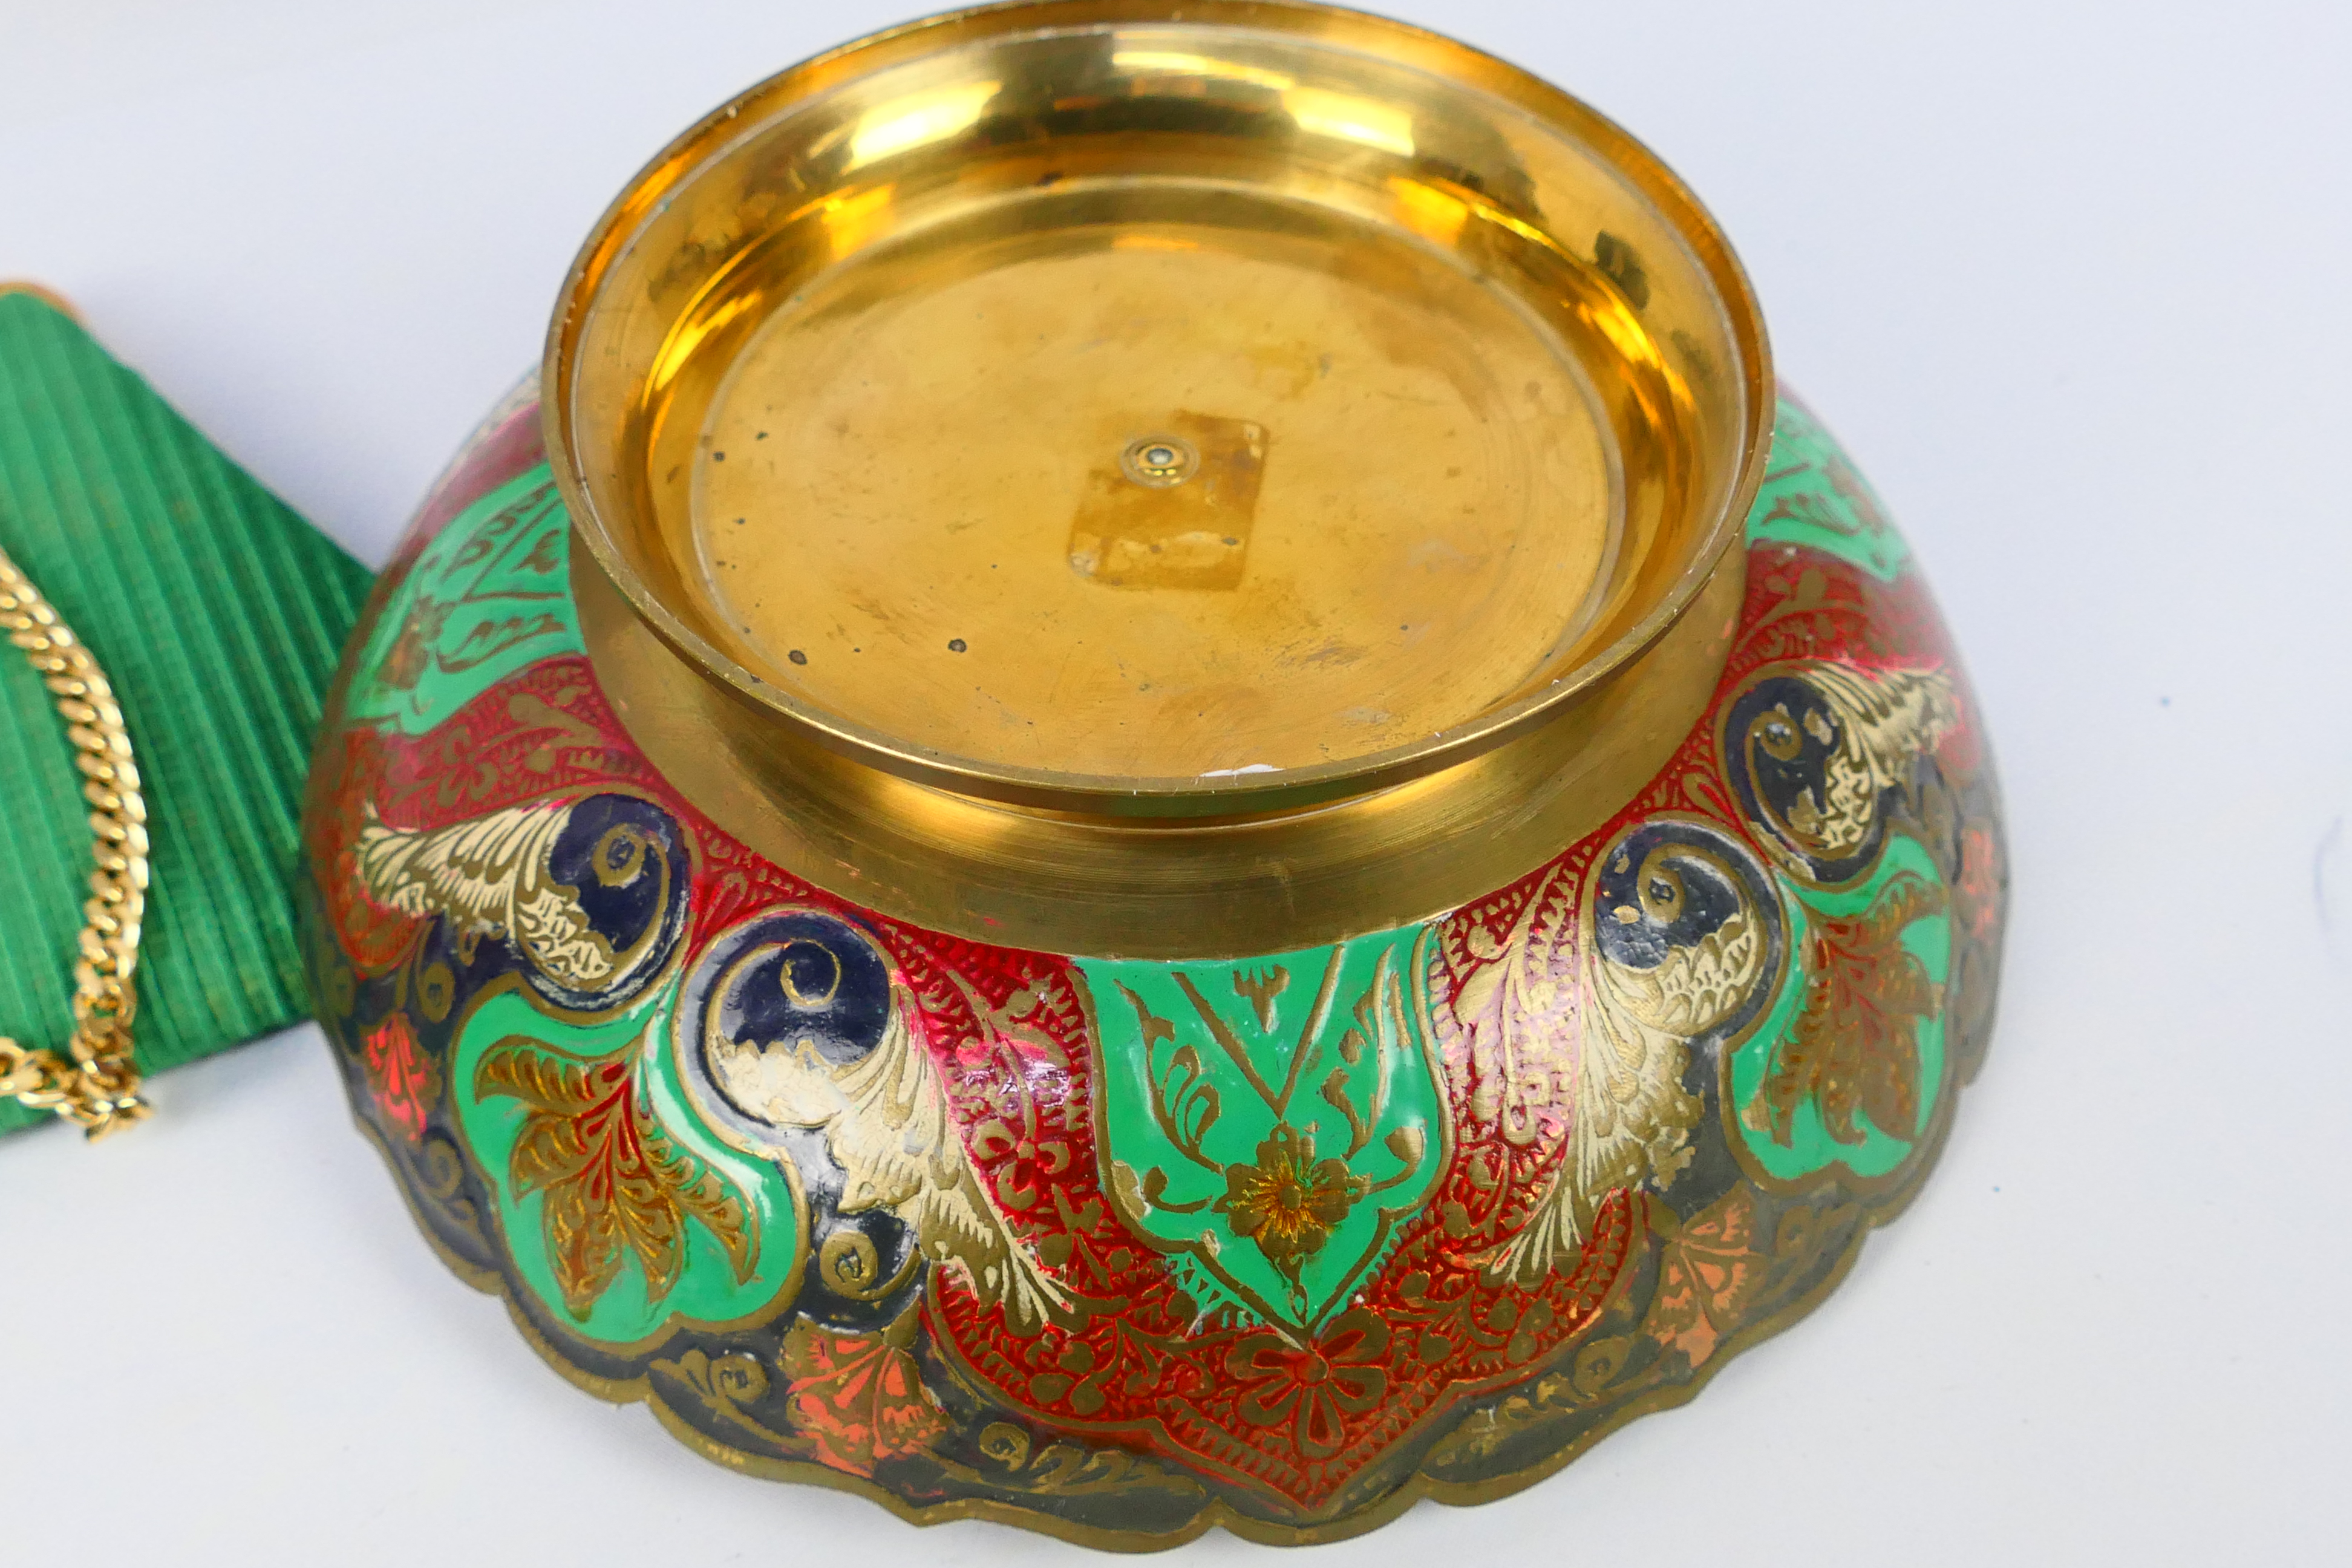 Lot to include a cloisonne ashtray, Asian metal bowl, - Image 9 of 10